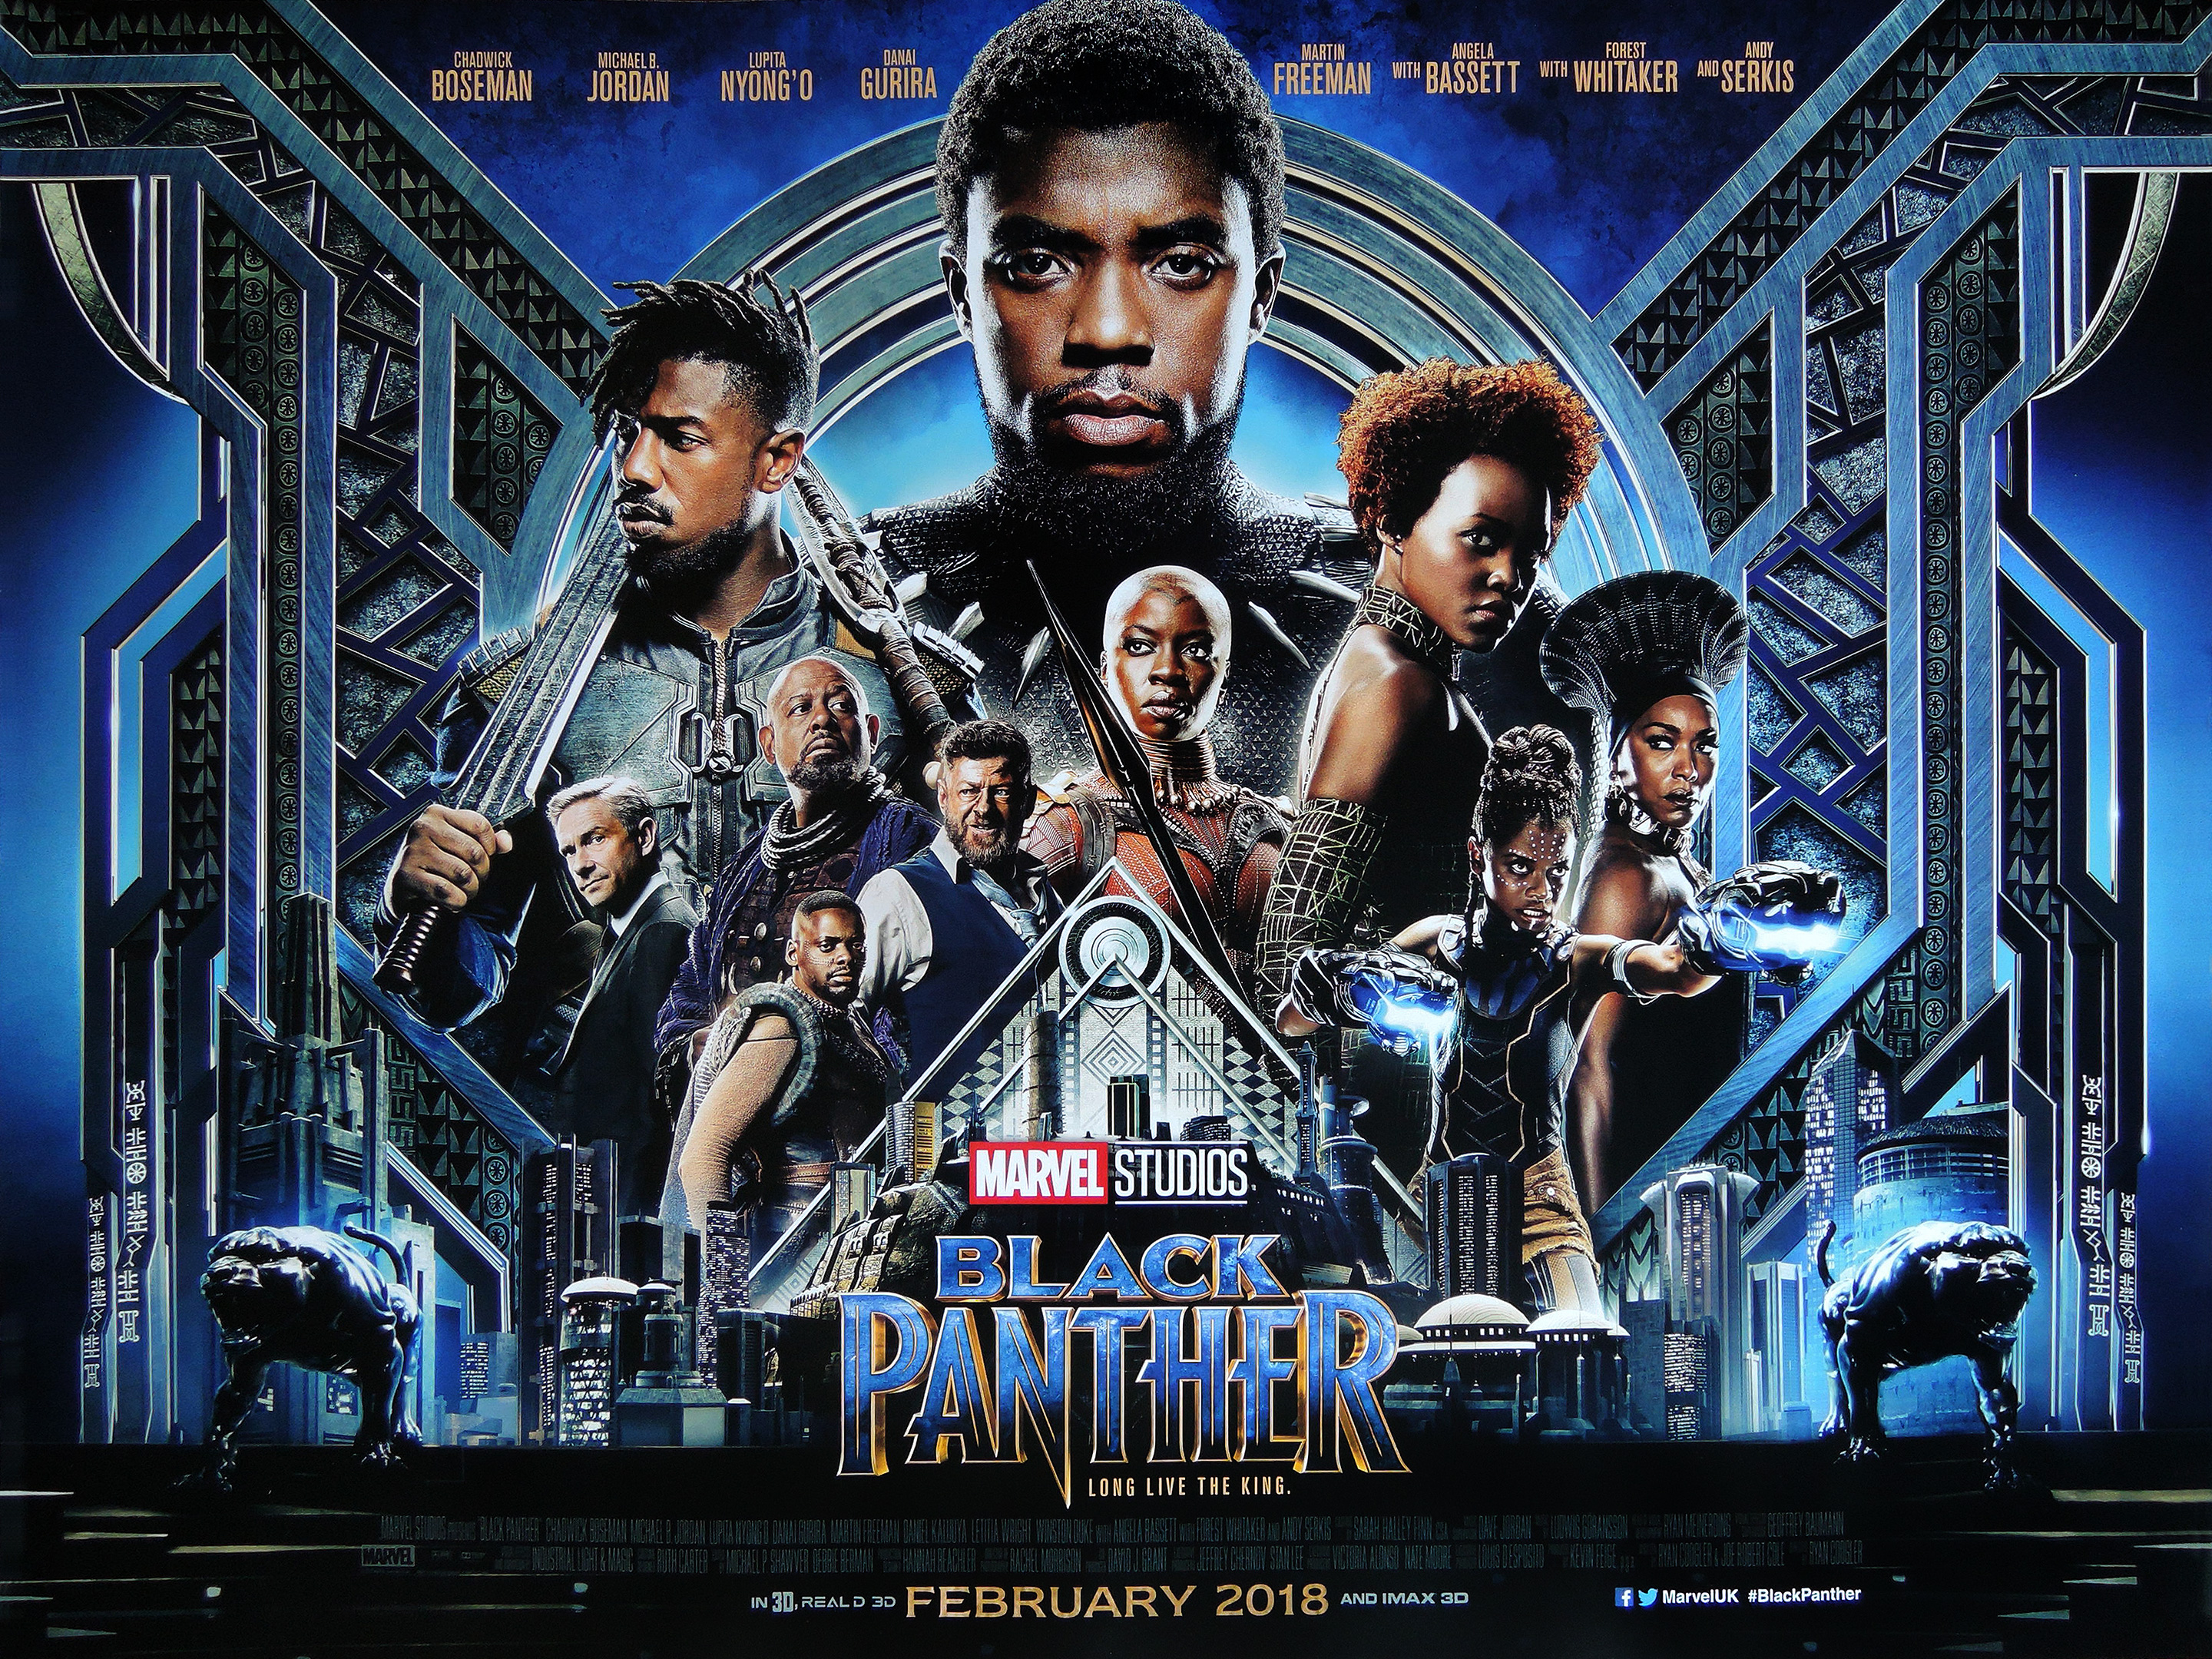 BlackPantherPodcastReview 